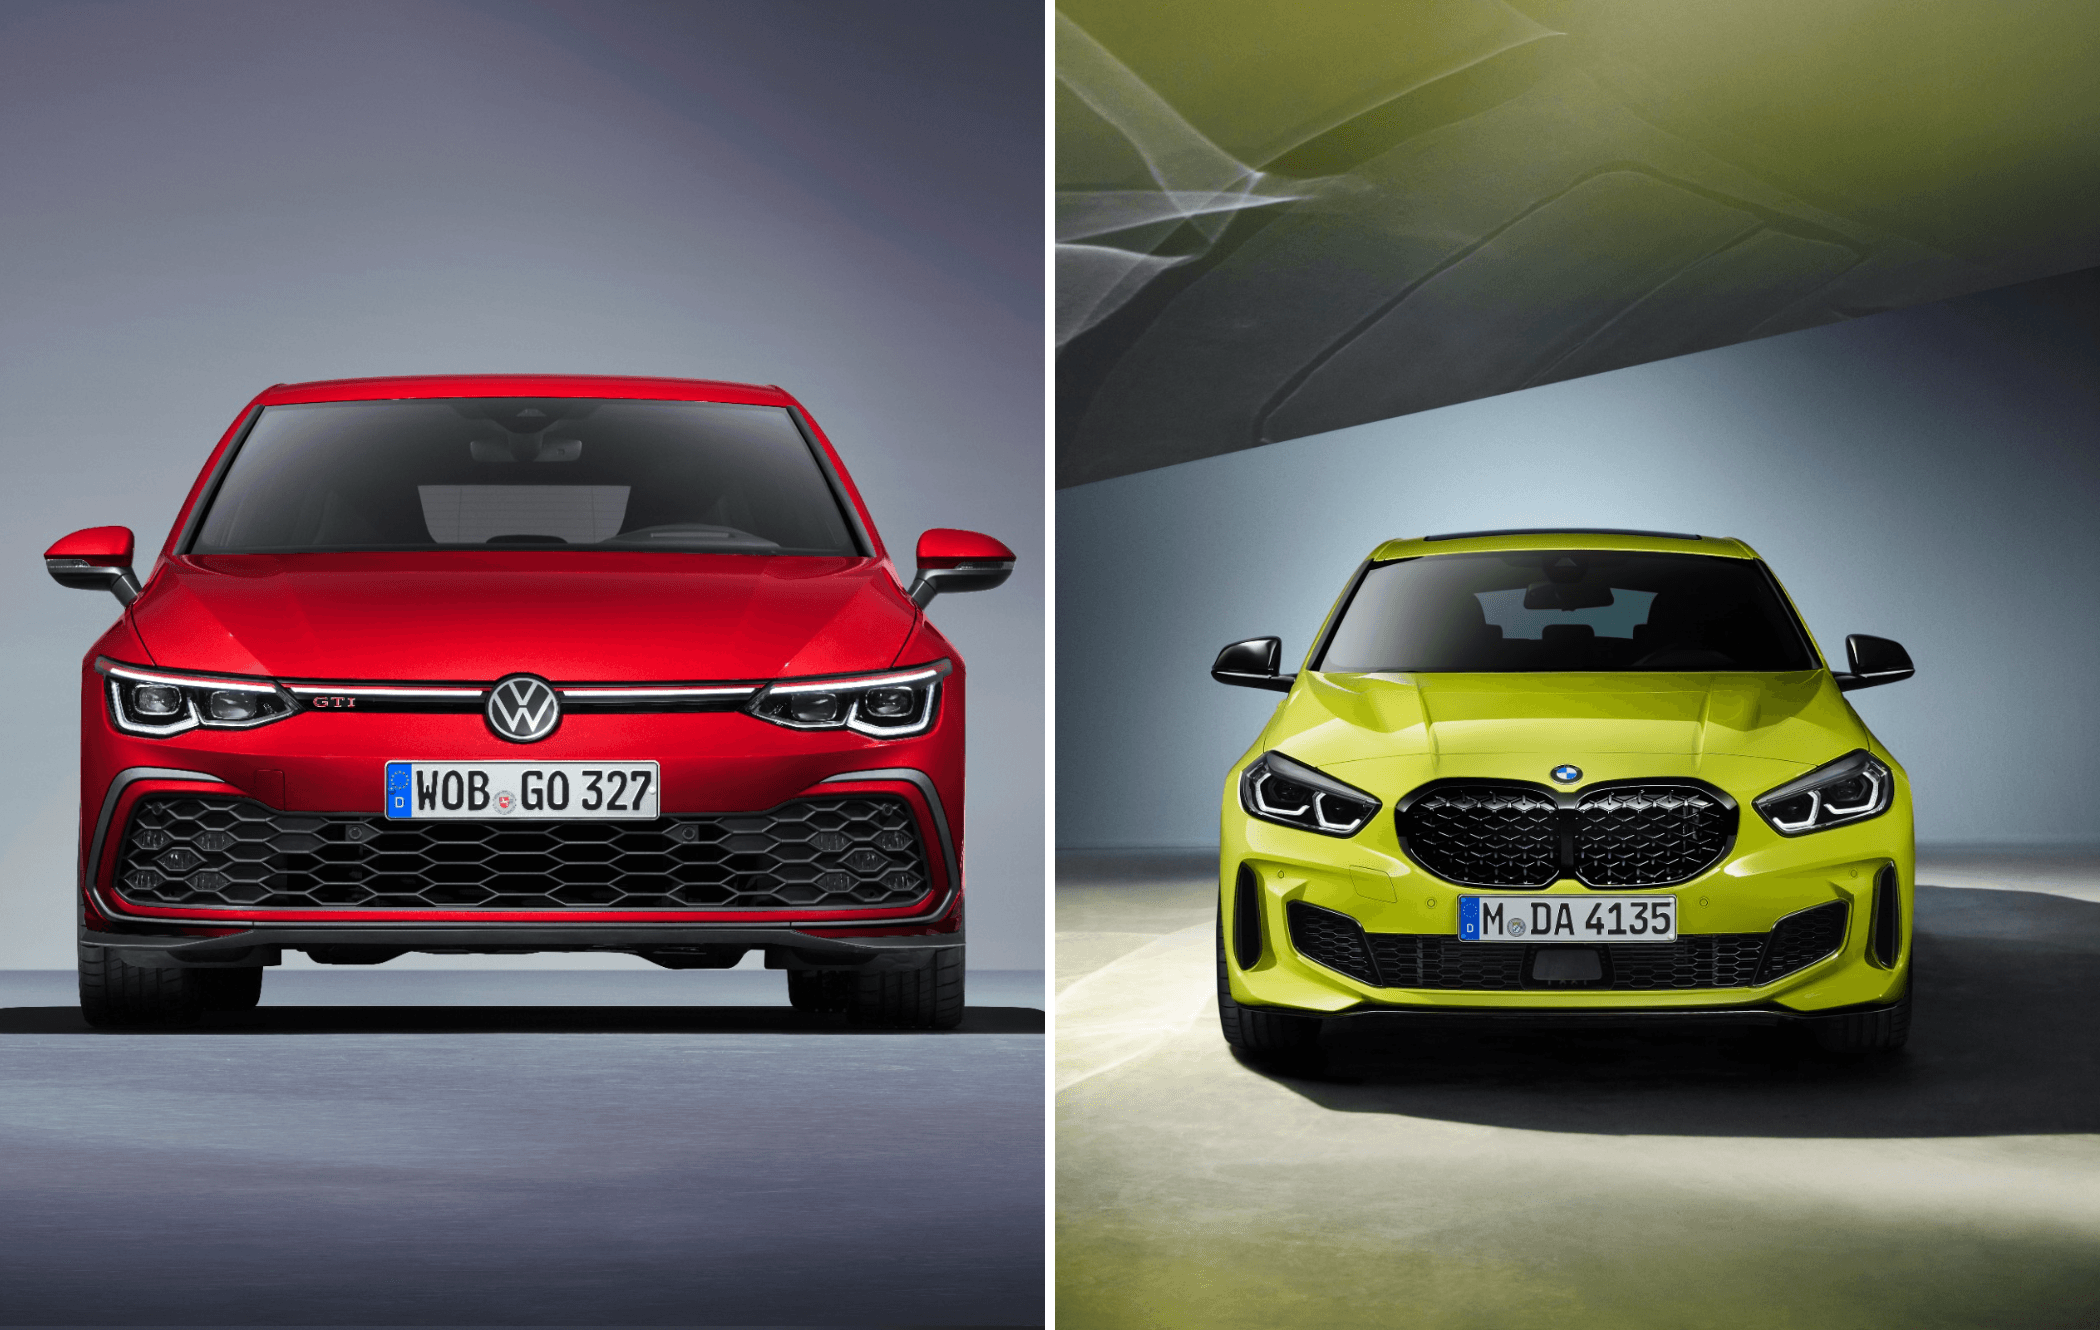 on the left is a red volkswagen golf front and on the right is a yellow bmw 1 series front